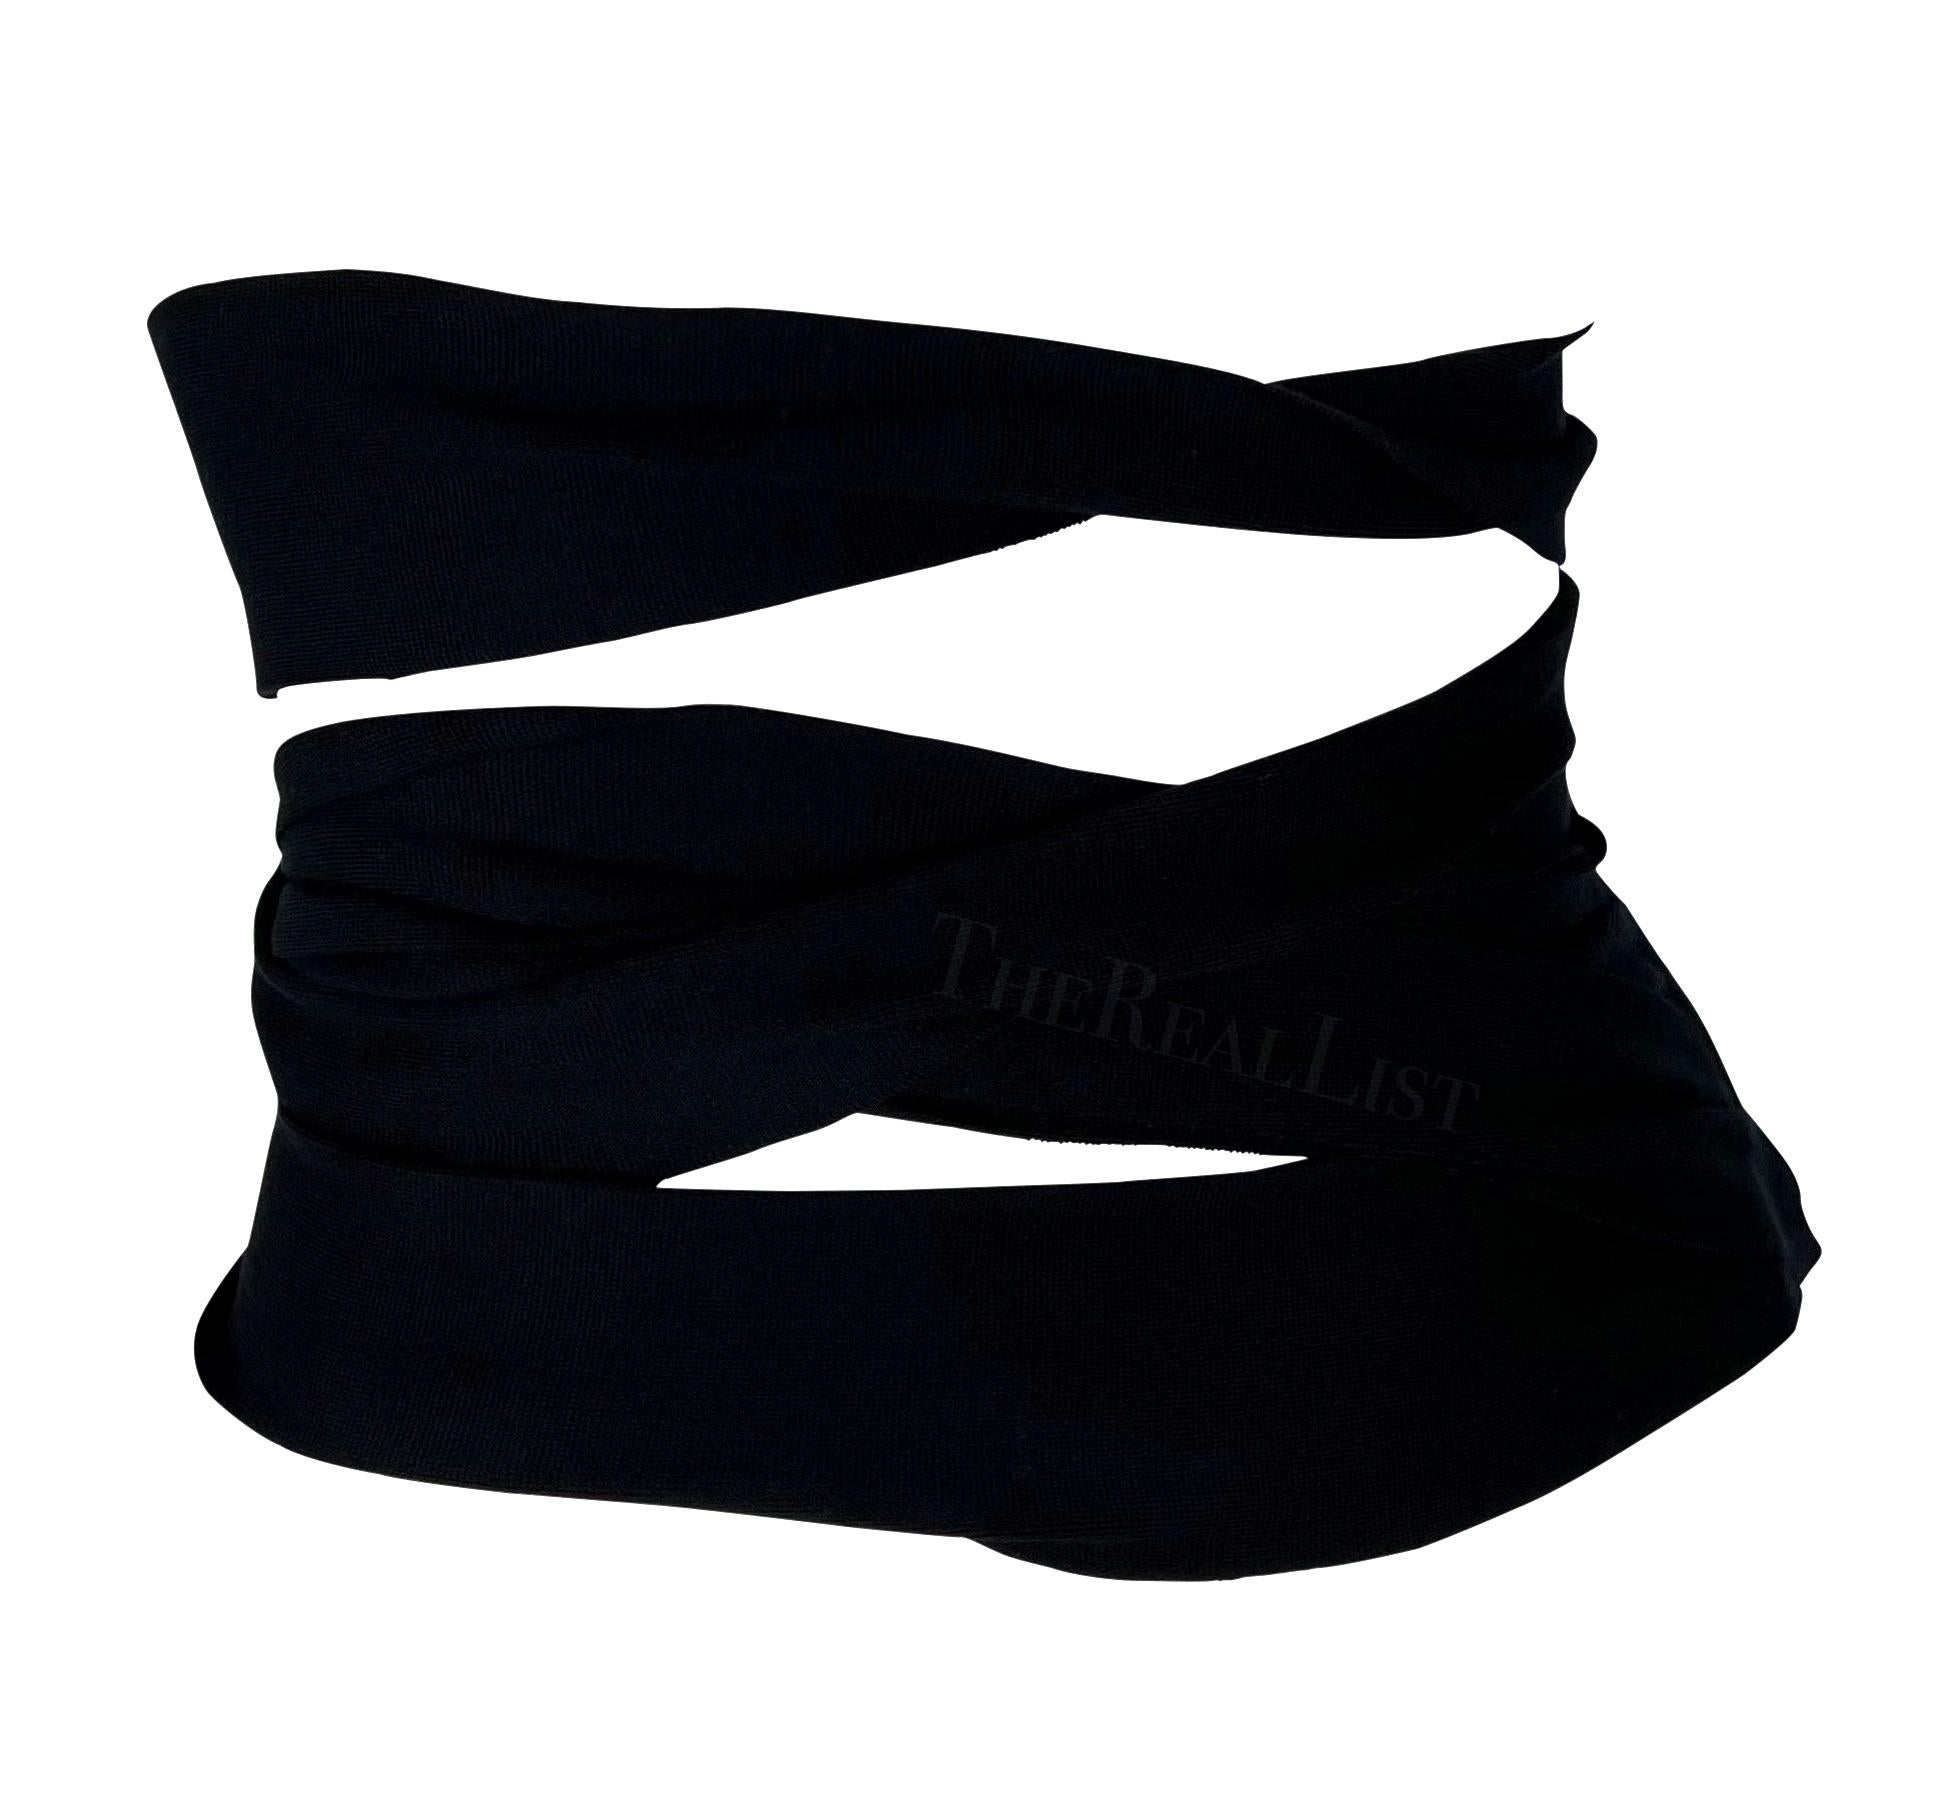 S/S 2001 Yves Saint Laurent by Tom Ford Black Bandage Corset Waist Belt Top In Excellent Condition For Sale In West Hollywood, CA